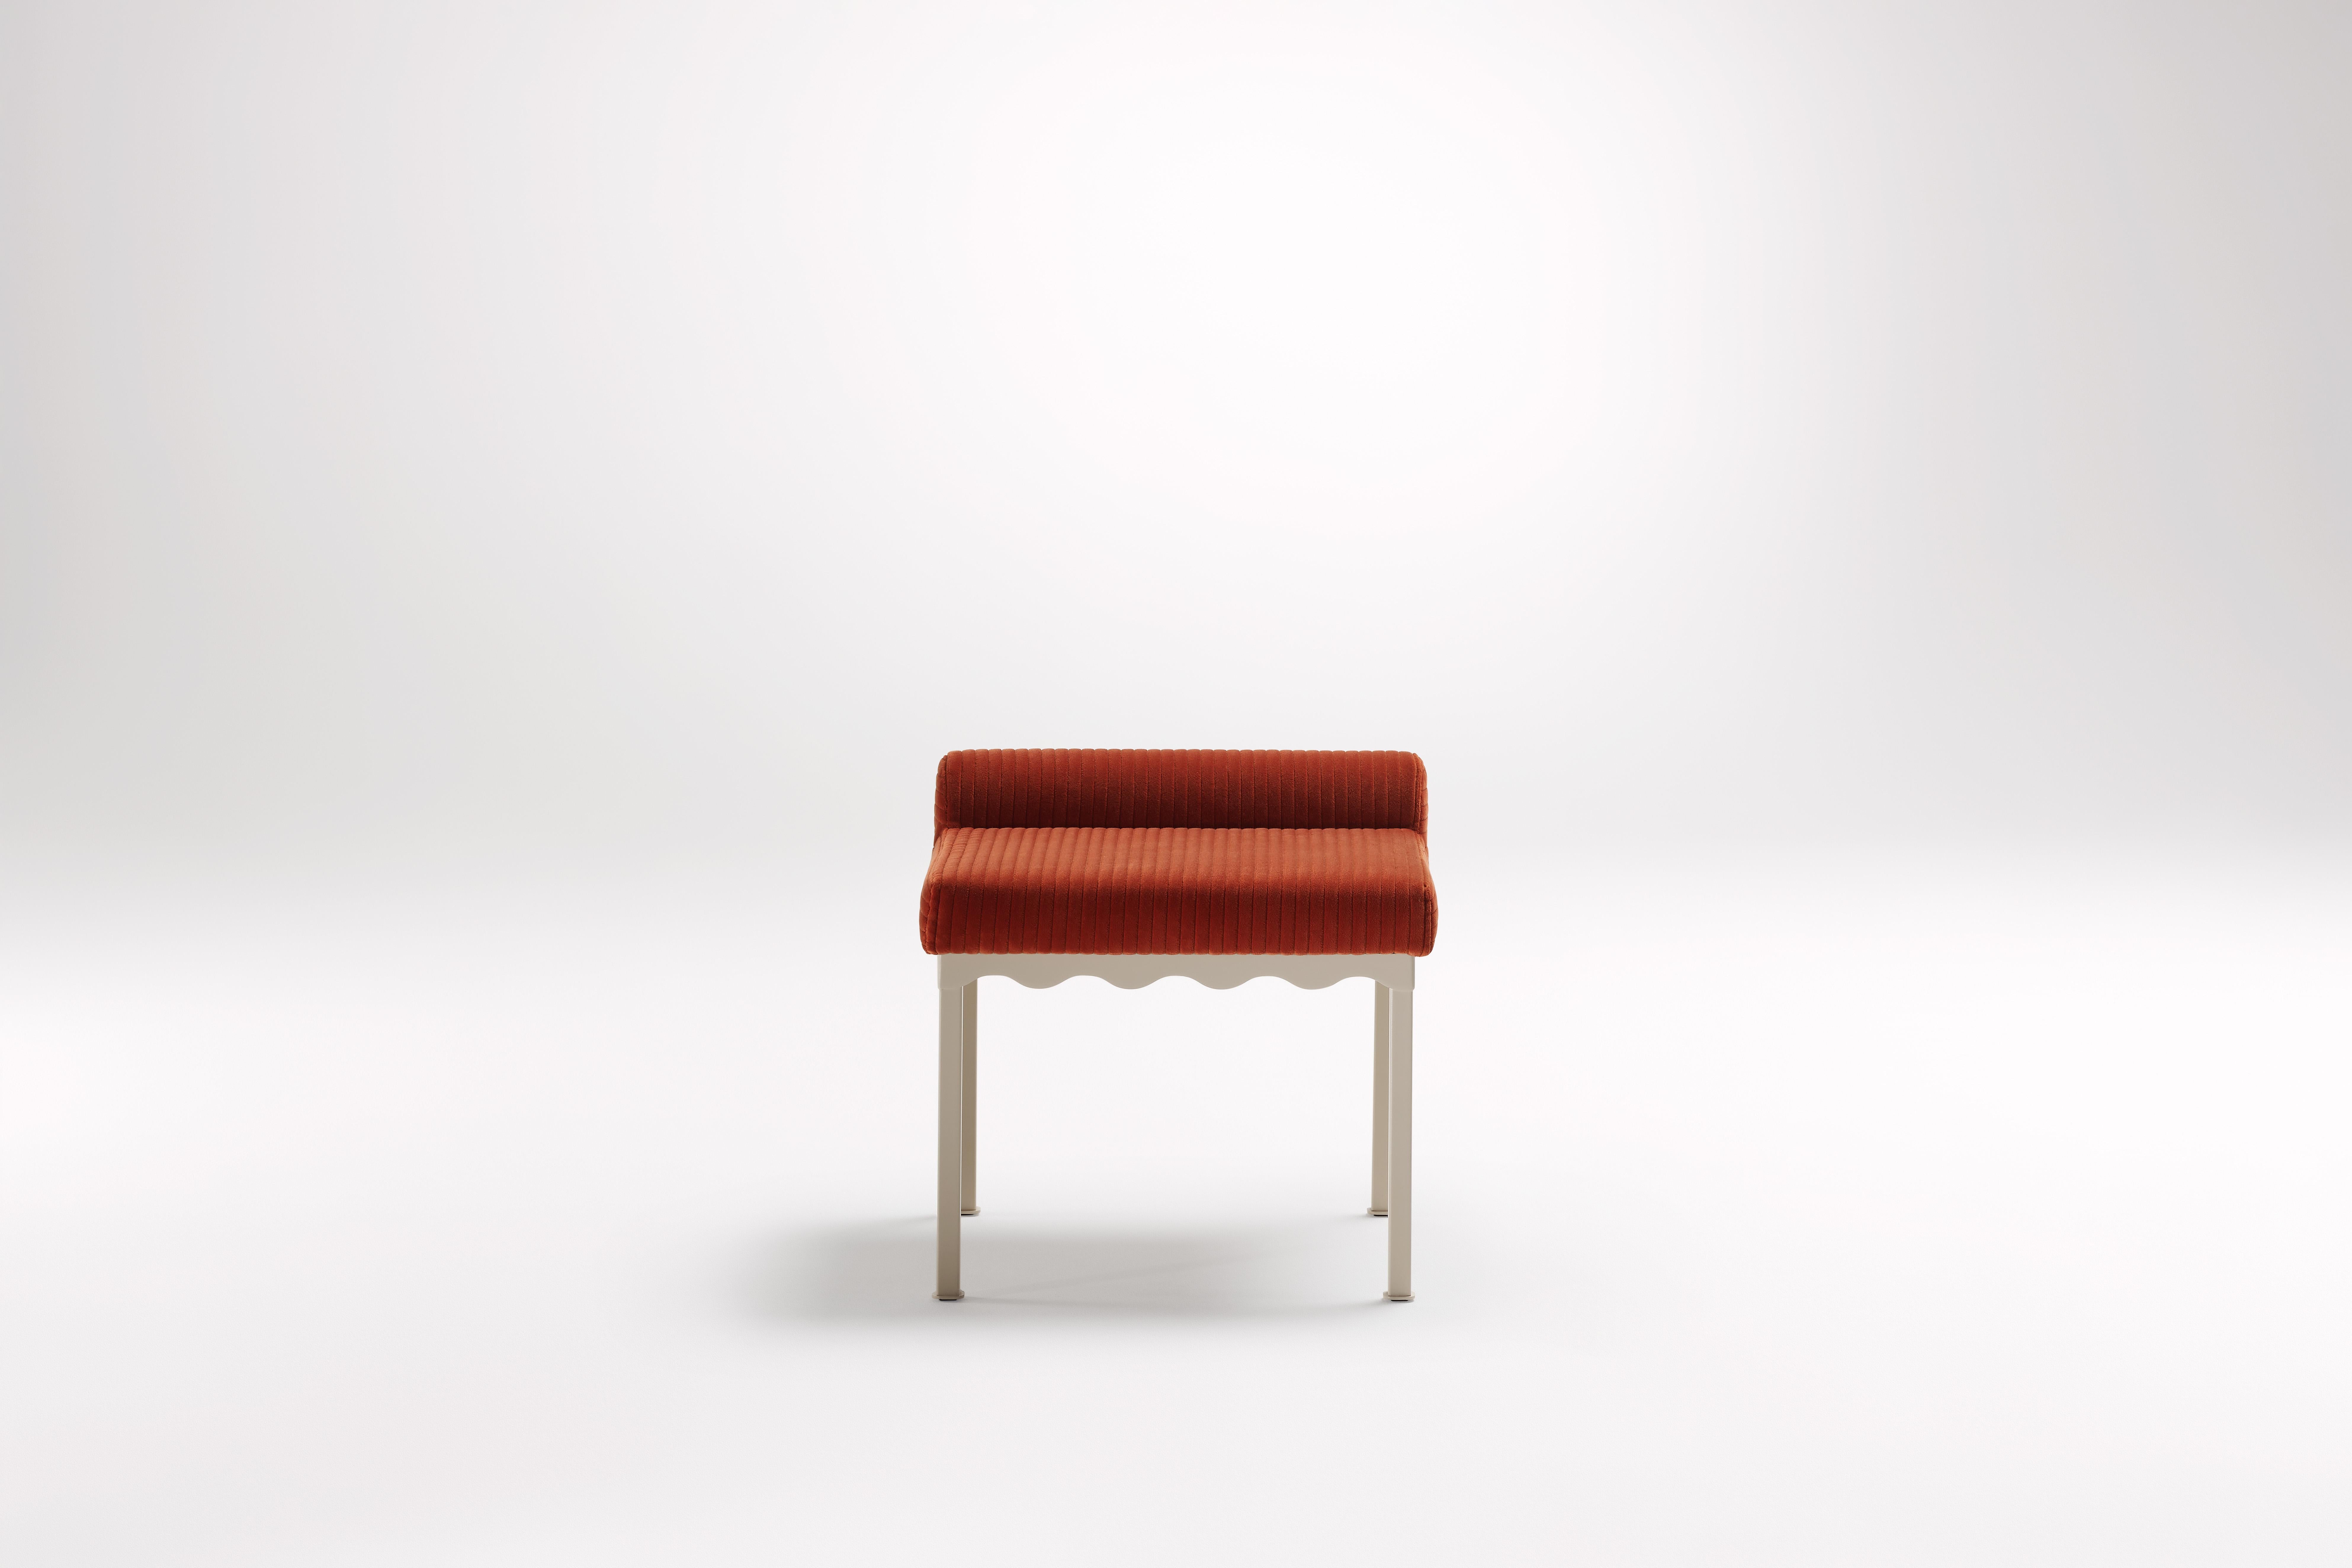 Sanguine Bellini 540 Bench by Coco Flip
Dimensions: D 54 x W 54 x H 52.5 cm
Materials: Timber / Upholstered tops, Powder-coated steel frame. 
Weight: 12 kg
Frame Finishes: Textura Paperbark.

Coco Flip is a Melbourne based furniture and lighting